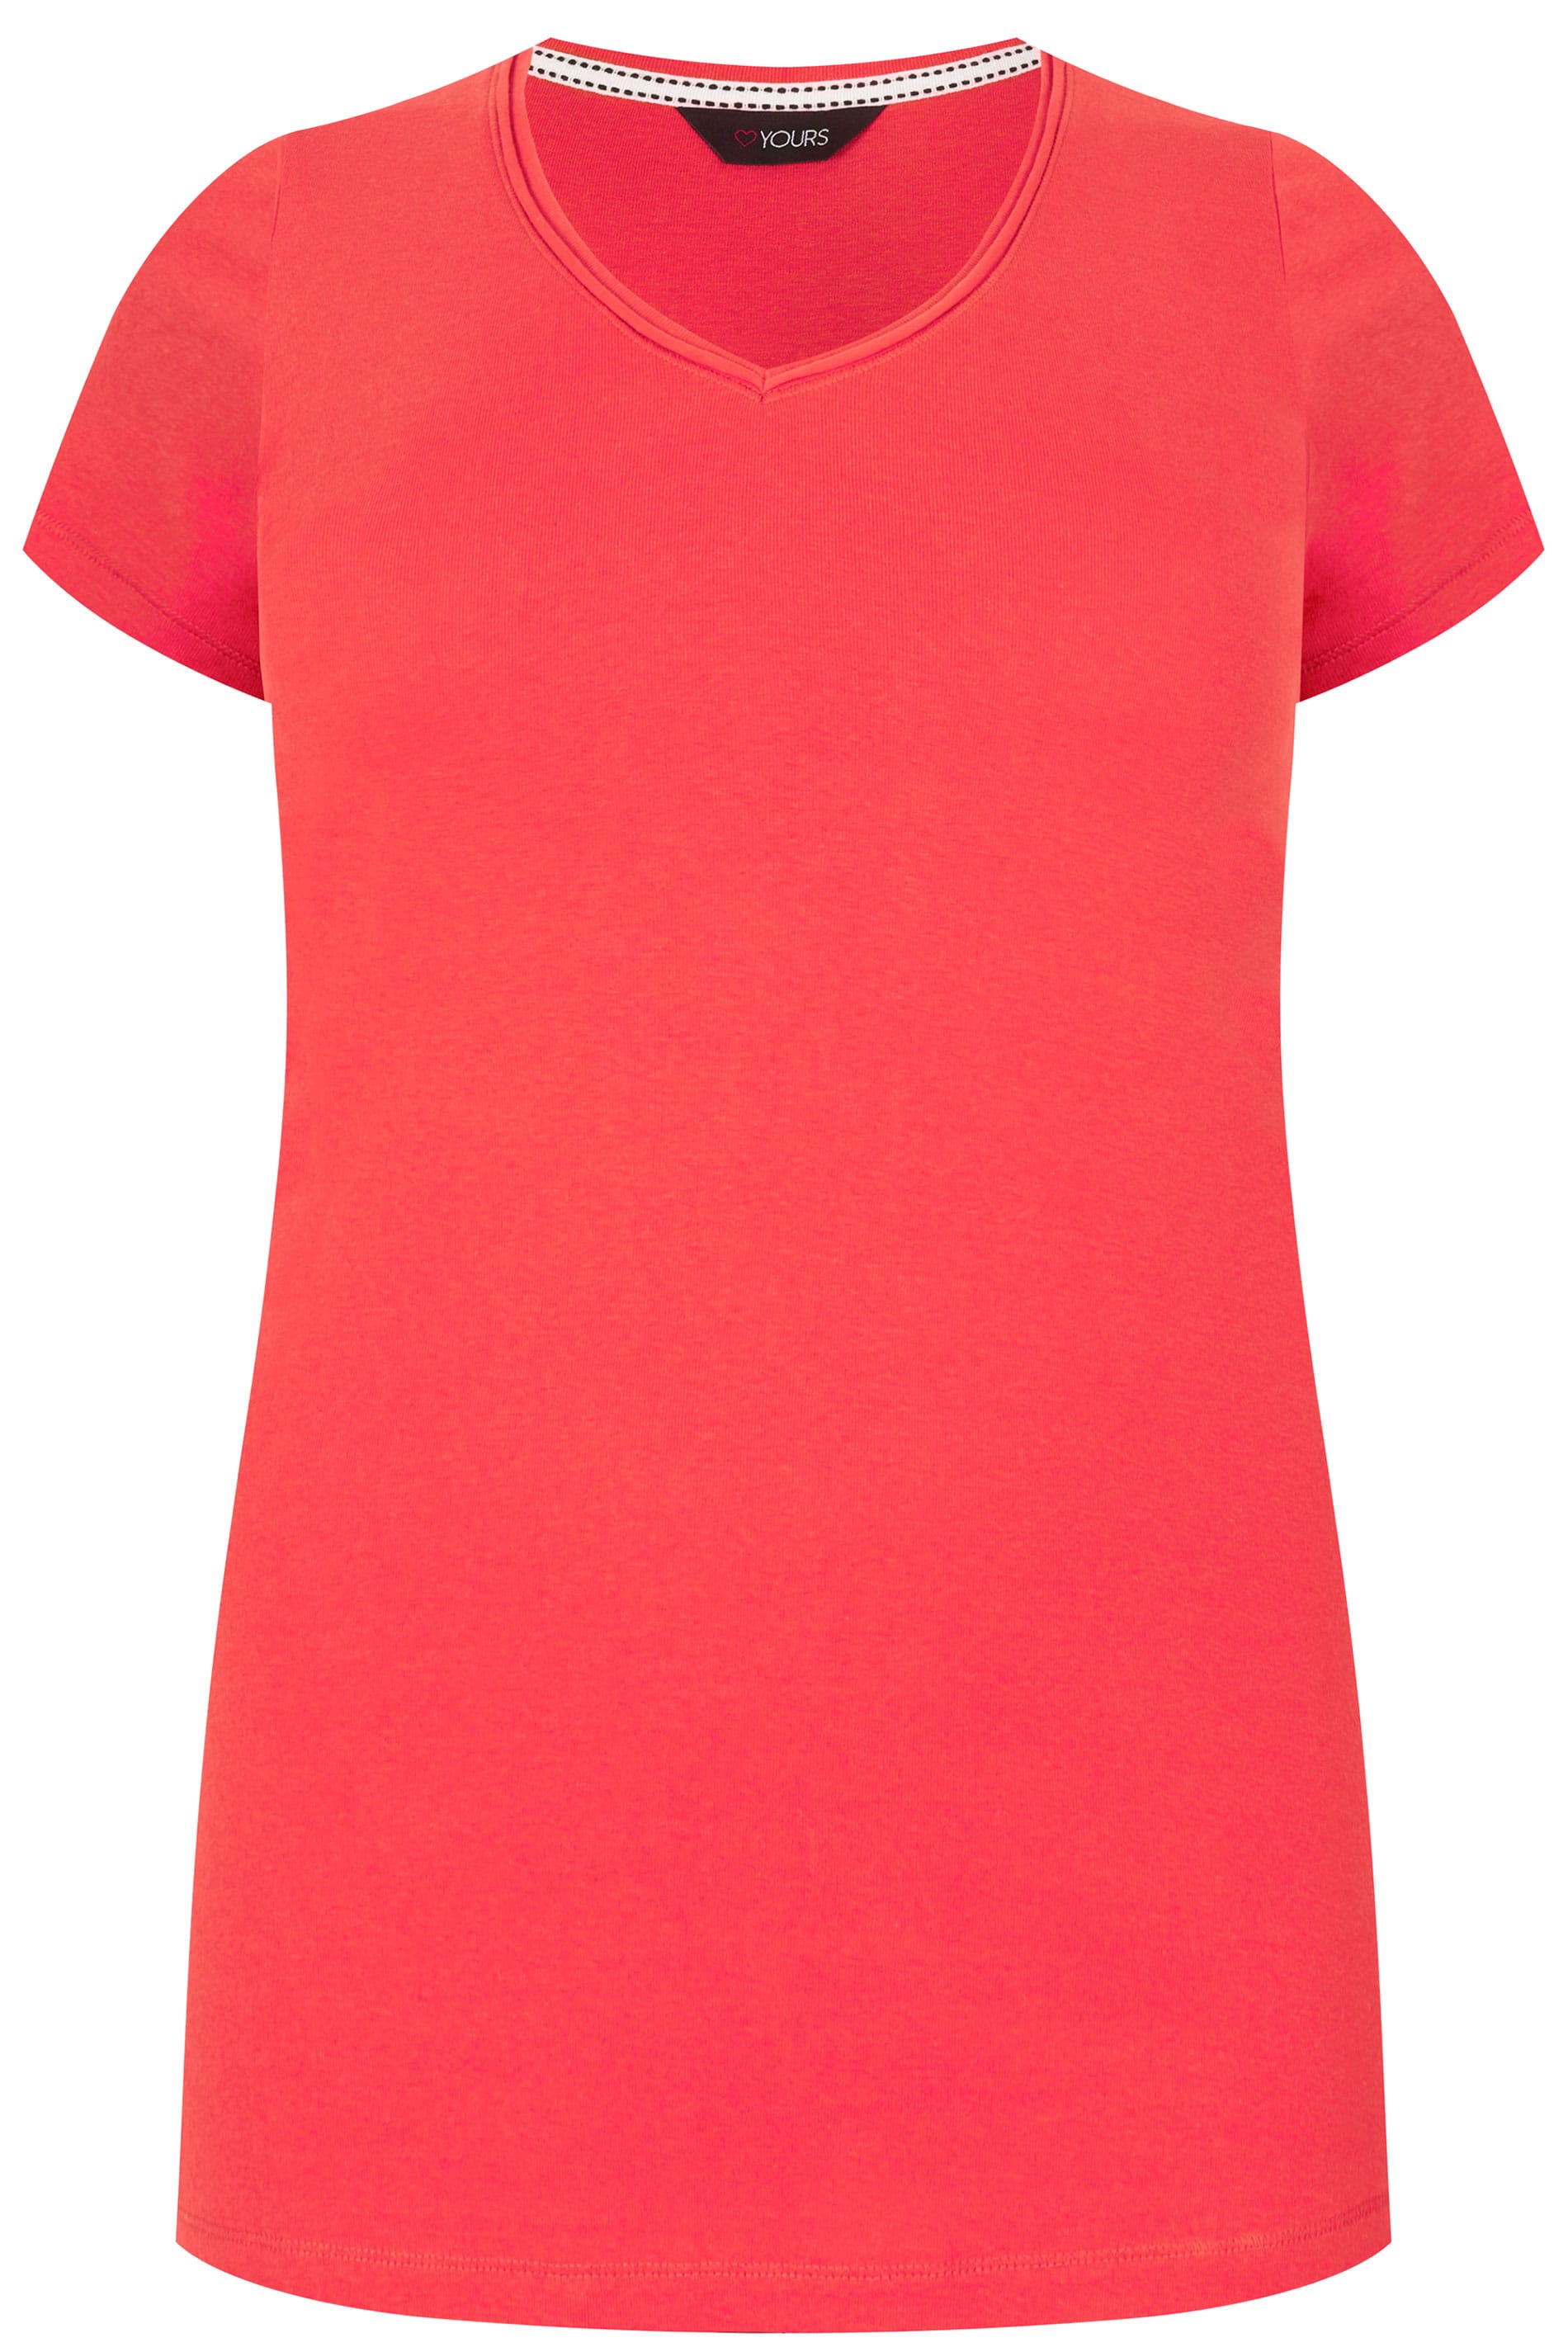 Plus Size Coral V-Neck T-Shirt | Sizes 16 to 36 | Yours Clothing